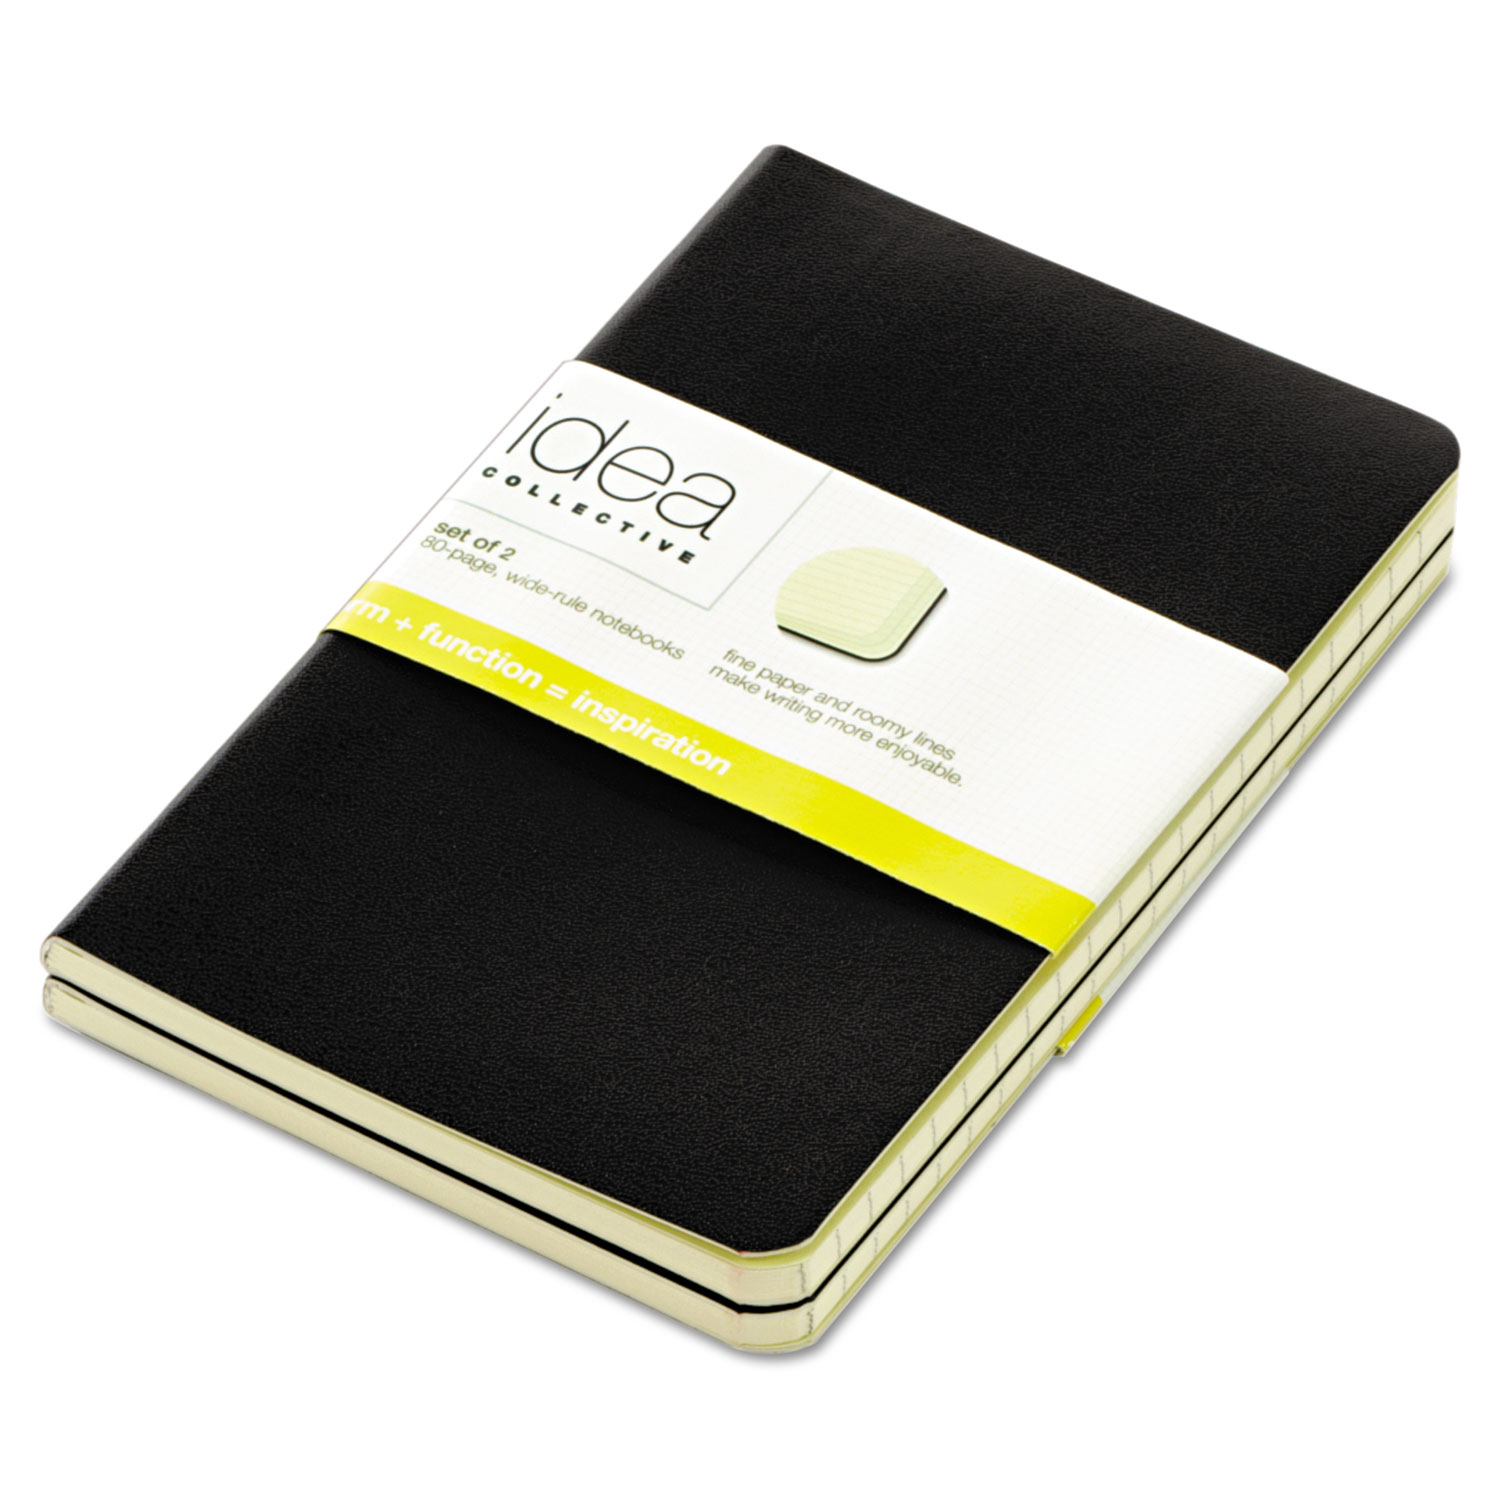  TOPS 56877 Idea Collective Journal, Wide/Legal Rule, Black Cover, 5.5 x 3.5, 40 Sheets, 2/Pack (TOP56877) 